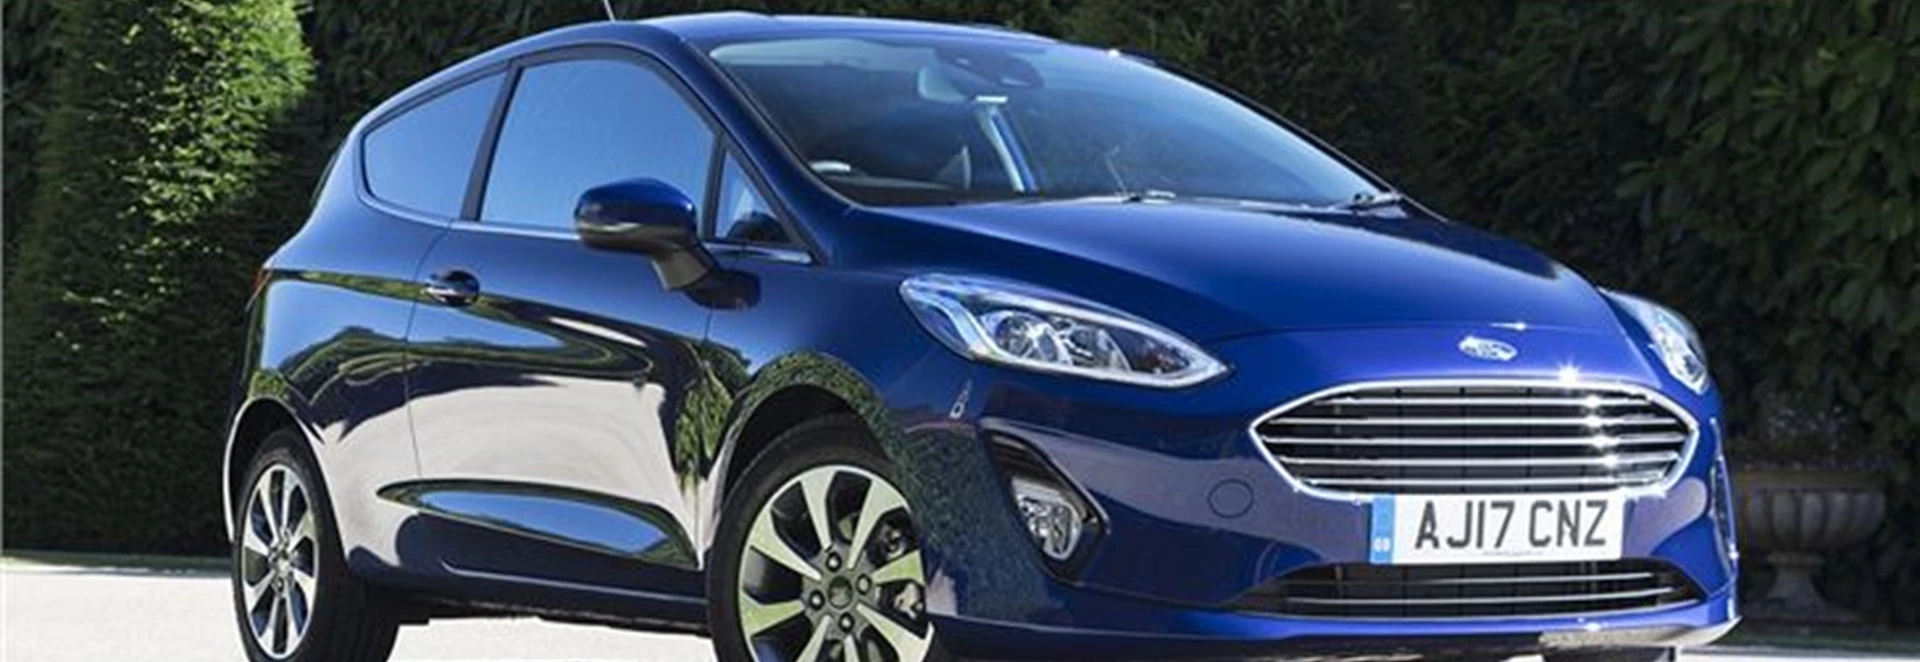 2017 Ford Fiesta production starts as launch looms